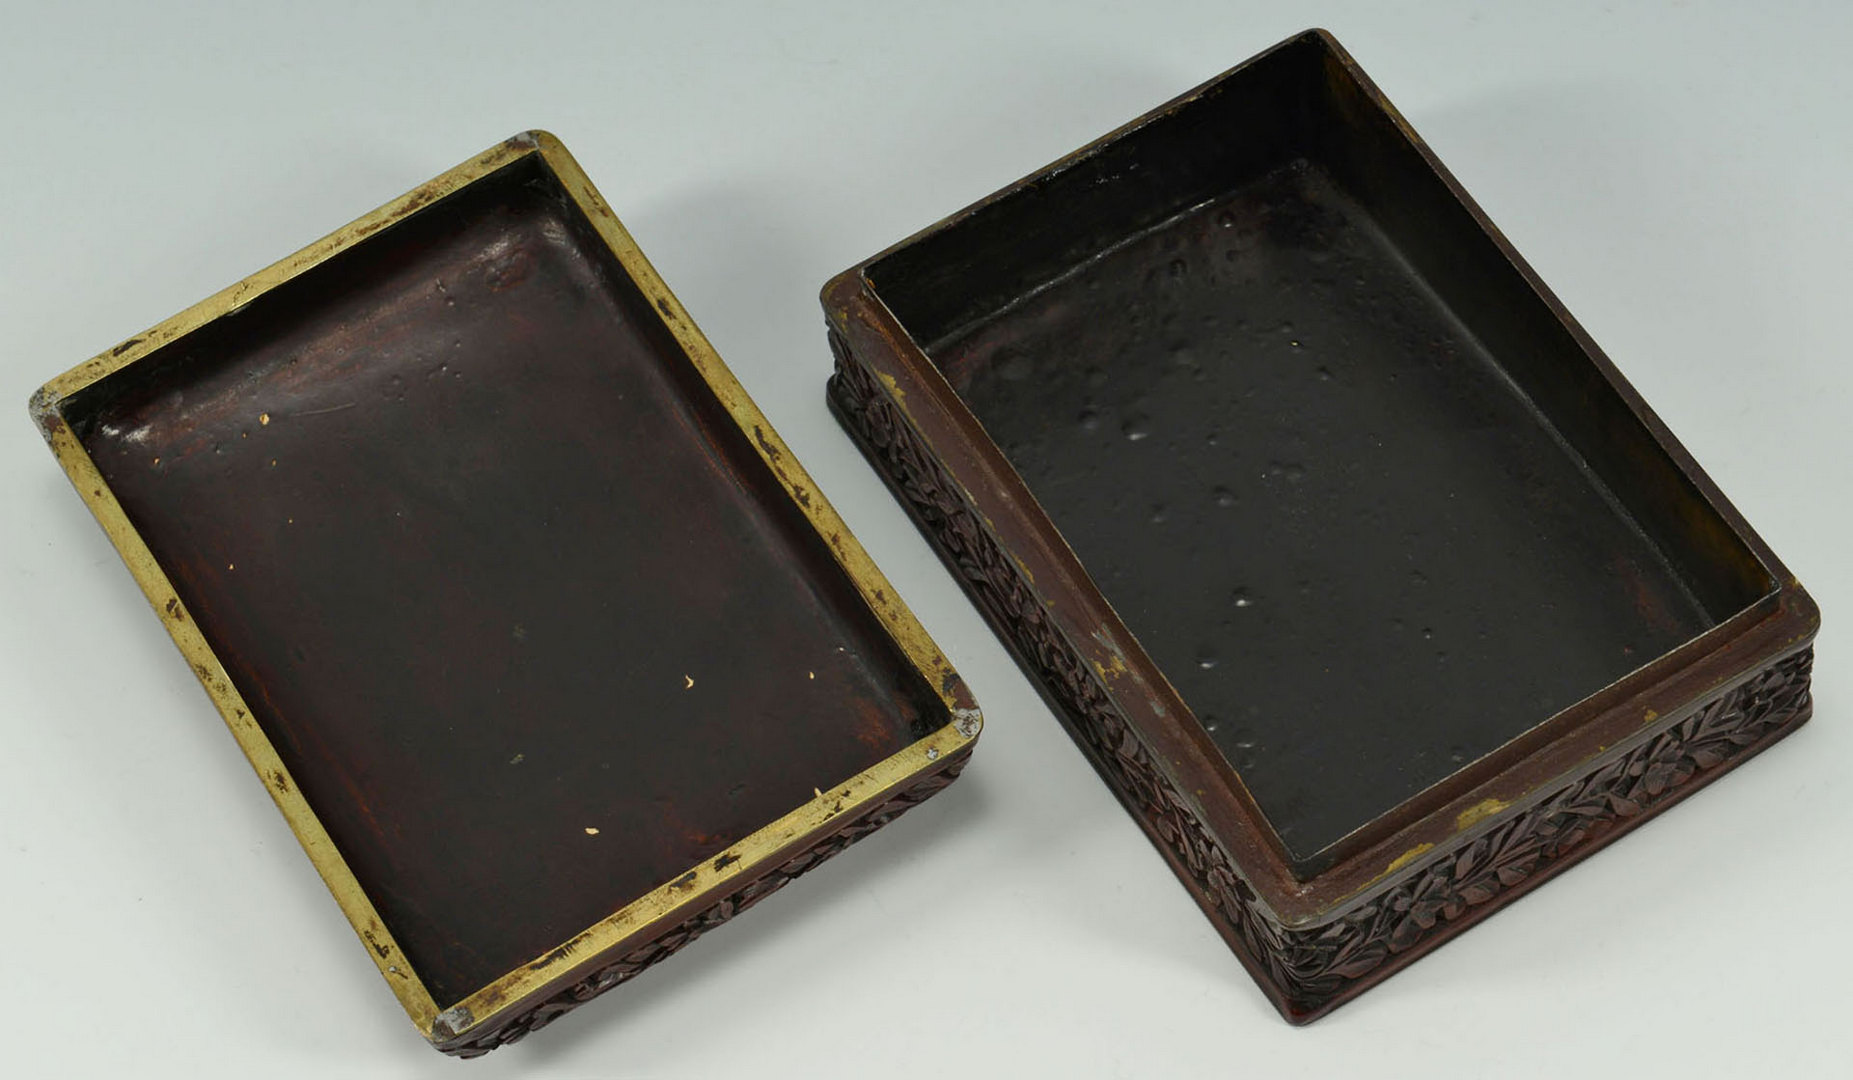 Lot 4: 19th century Carved Chinese Cinnabar Box